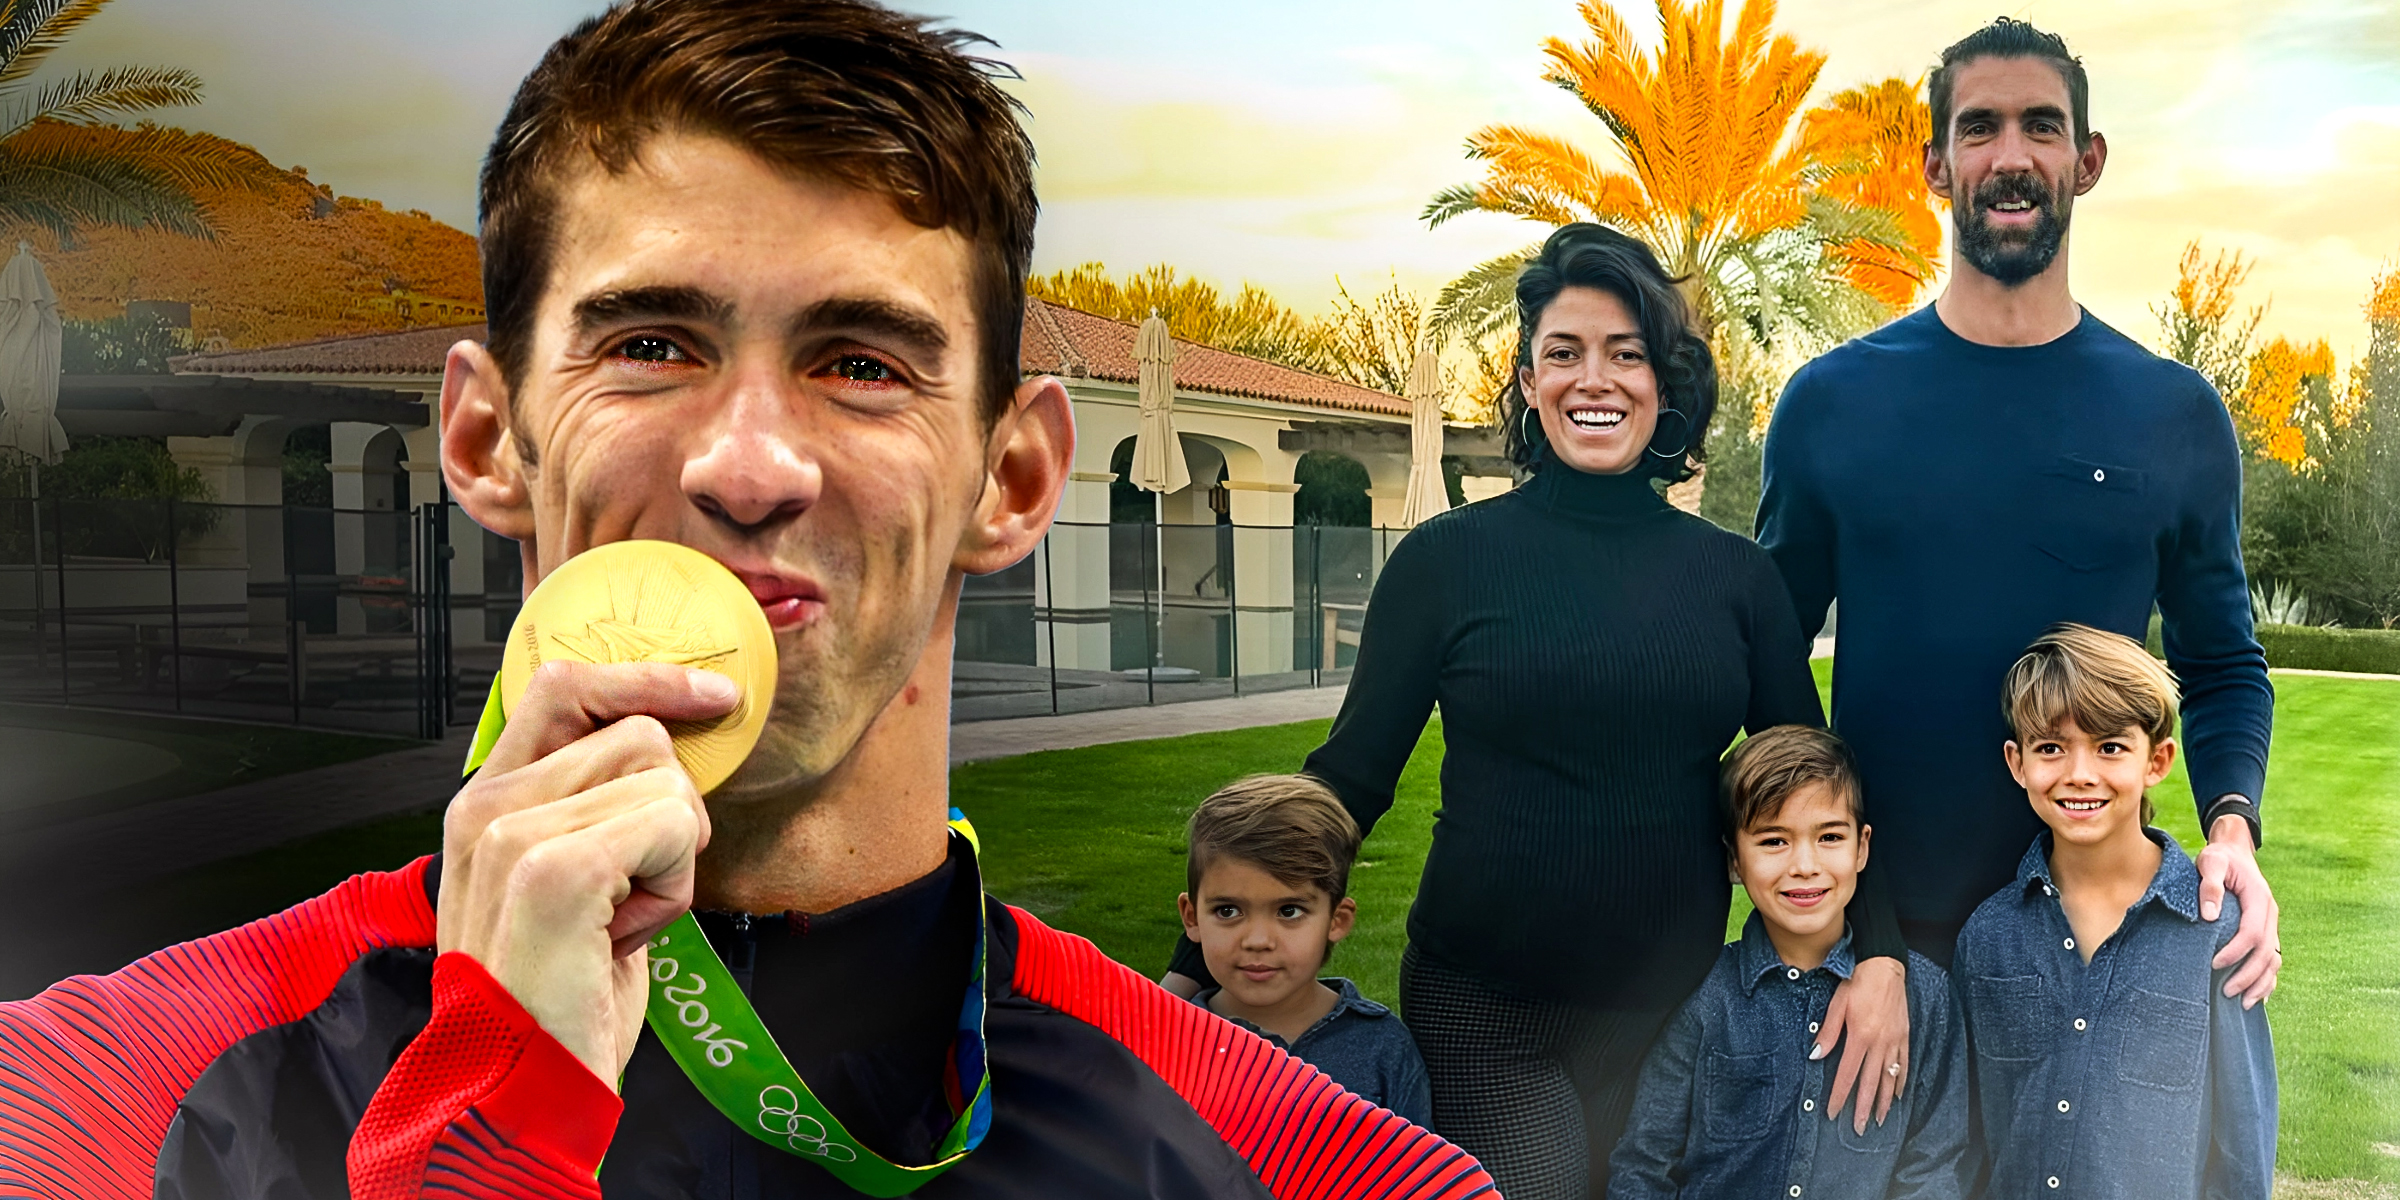 Michael Phelps | Nicole Johnson and Michael Phelps with their sons Boomer, Beckett, and Maverick Phelps | Sources: Getty Images | Instagram/m_phelps00